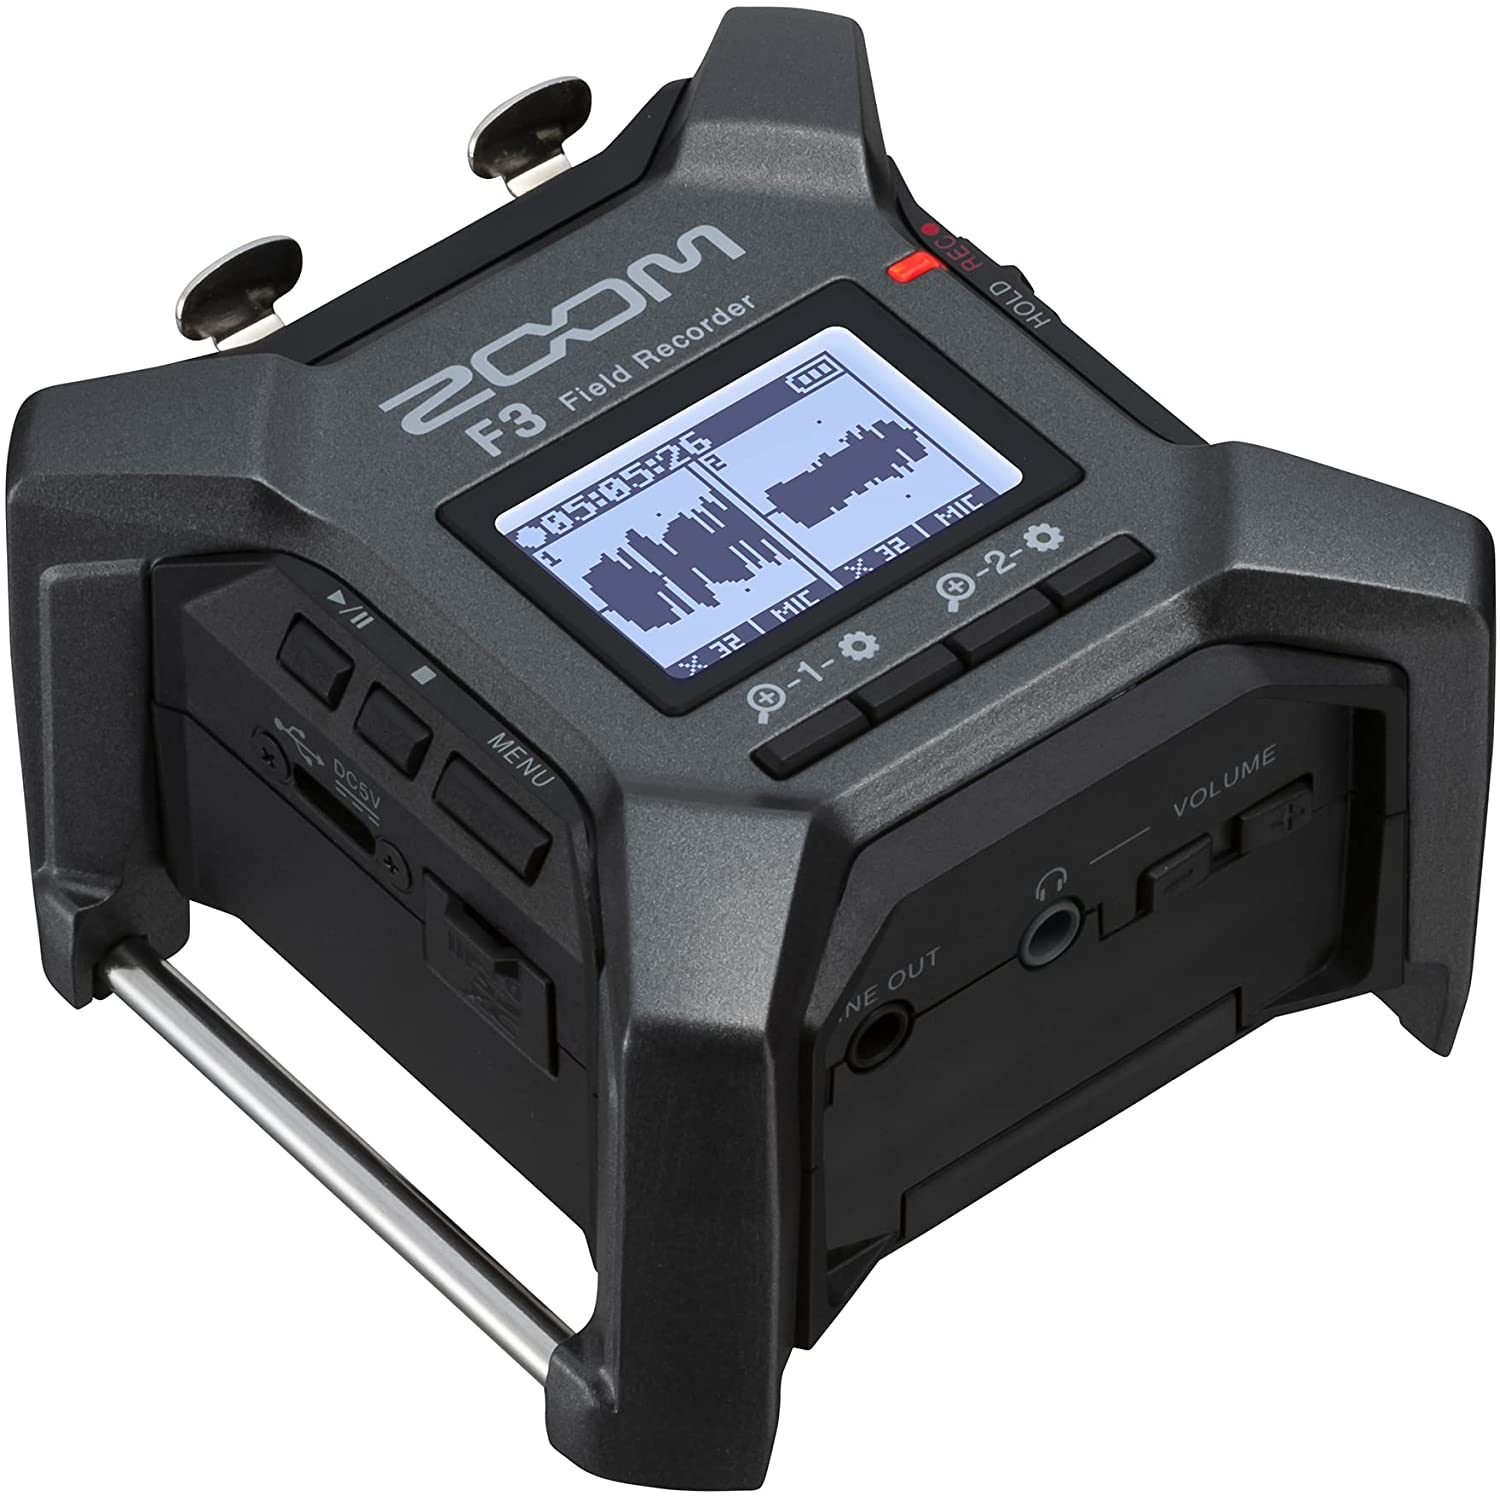 First look: Zoom F3 2-track 32-bit float recorder with 48 kHz sampling rate 34